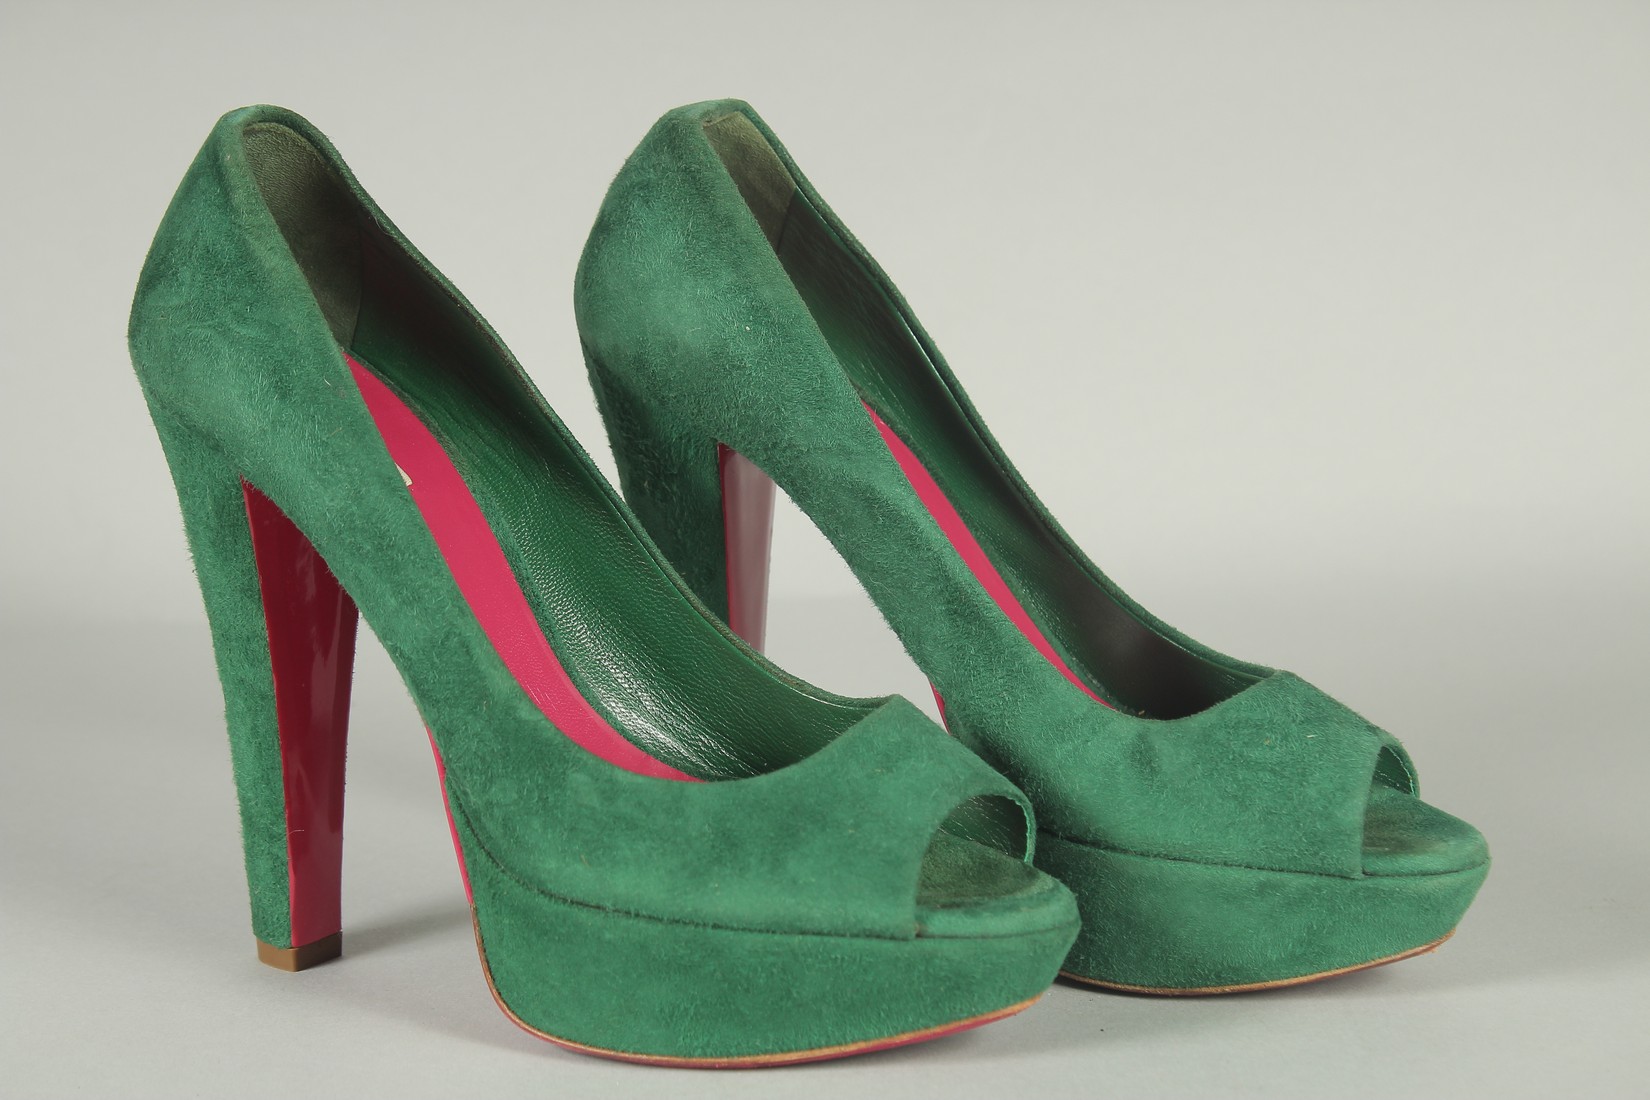 A PAIR OF MIU MIU GREEN SUEDE SHOES. Size UK 37, boxed.